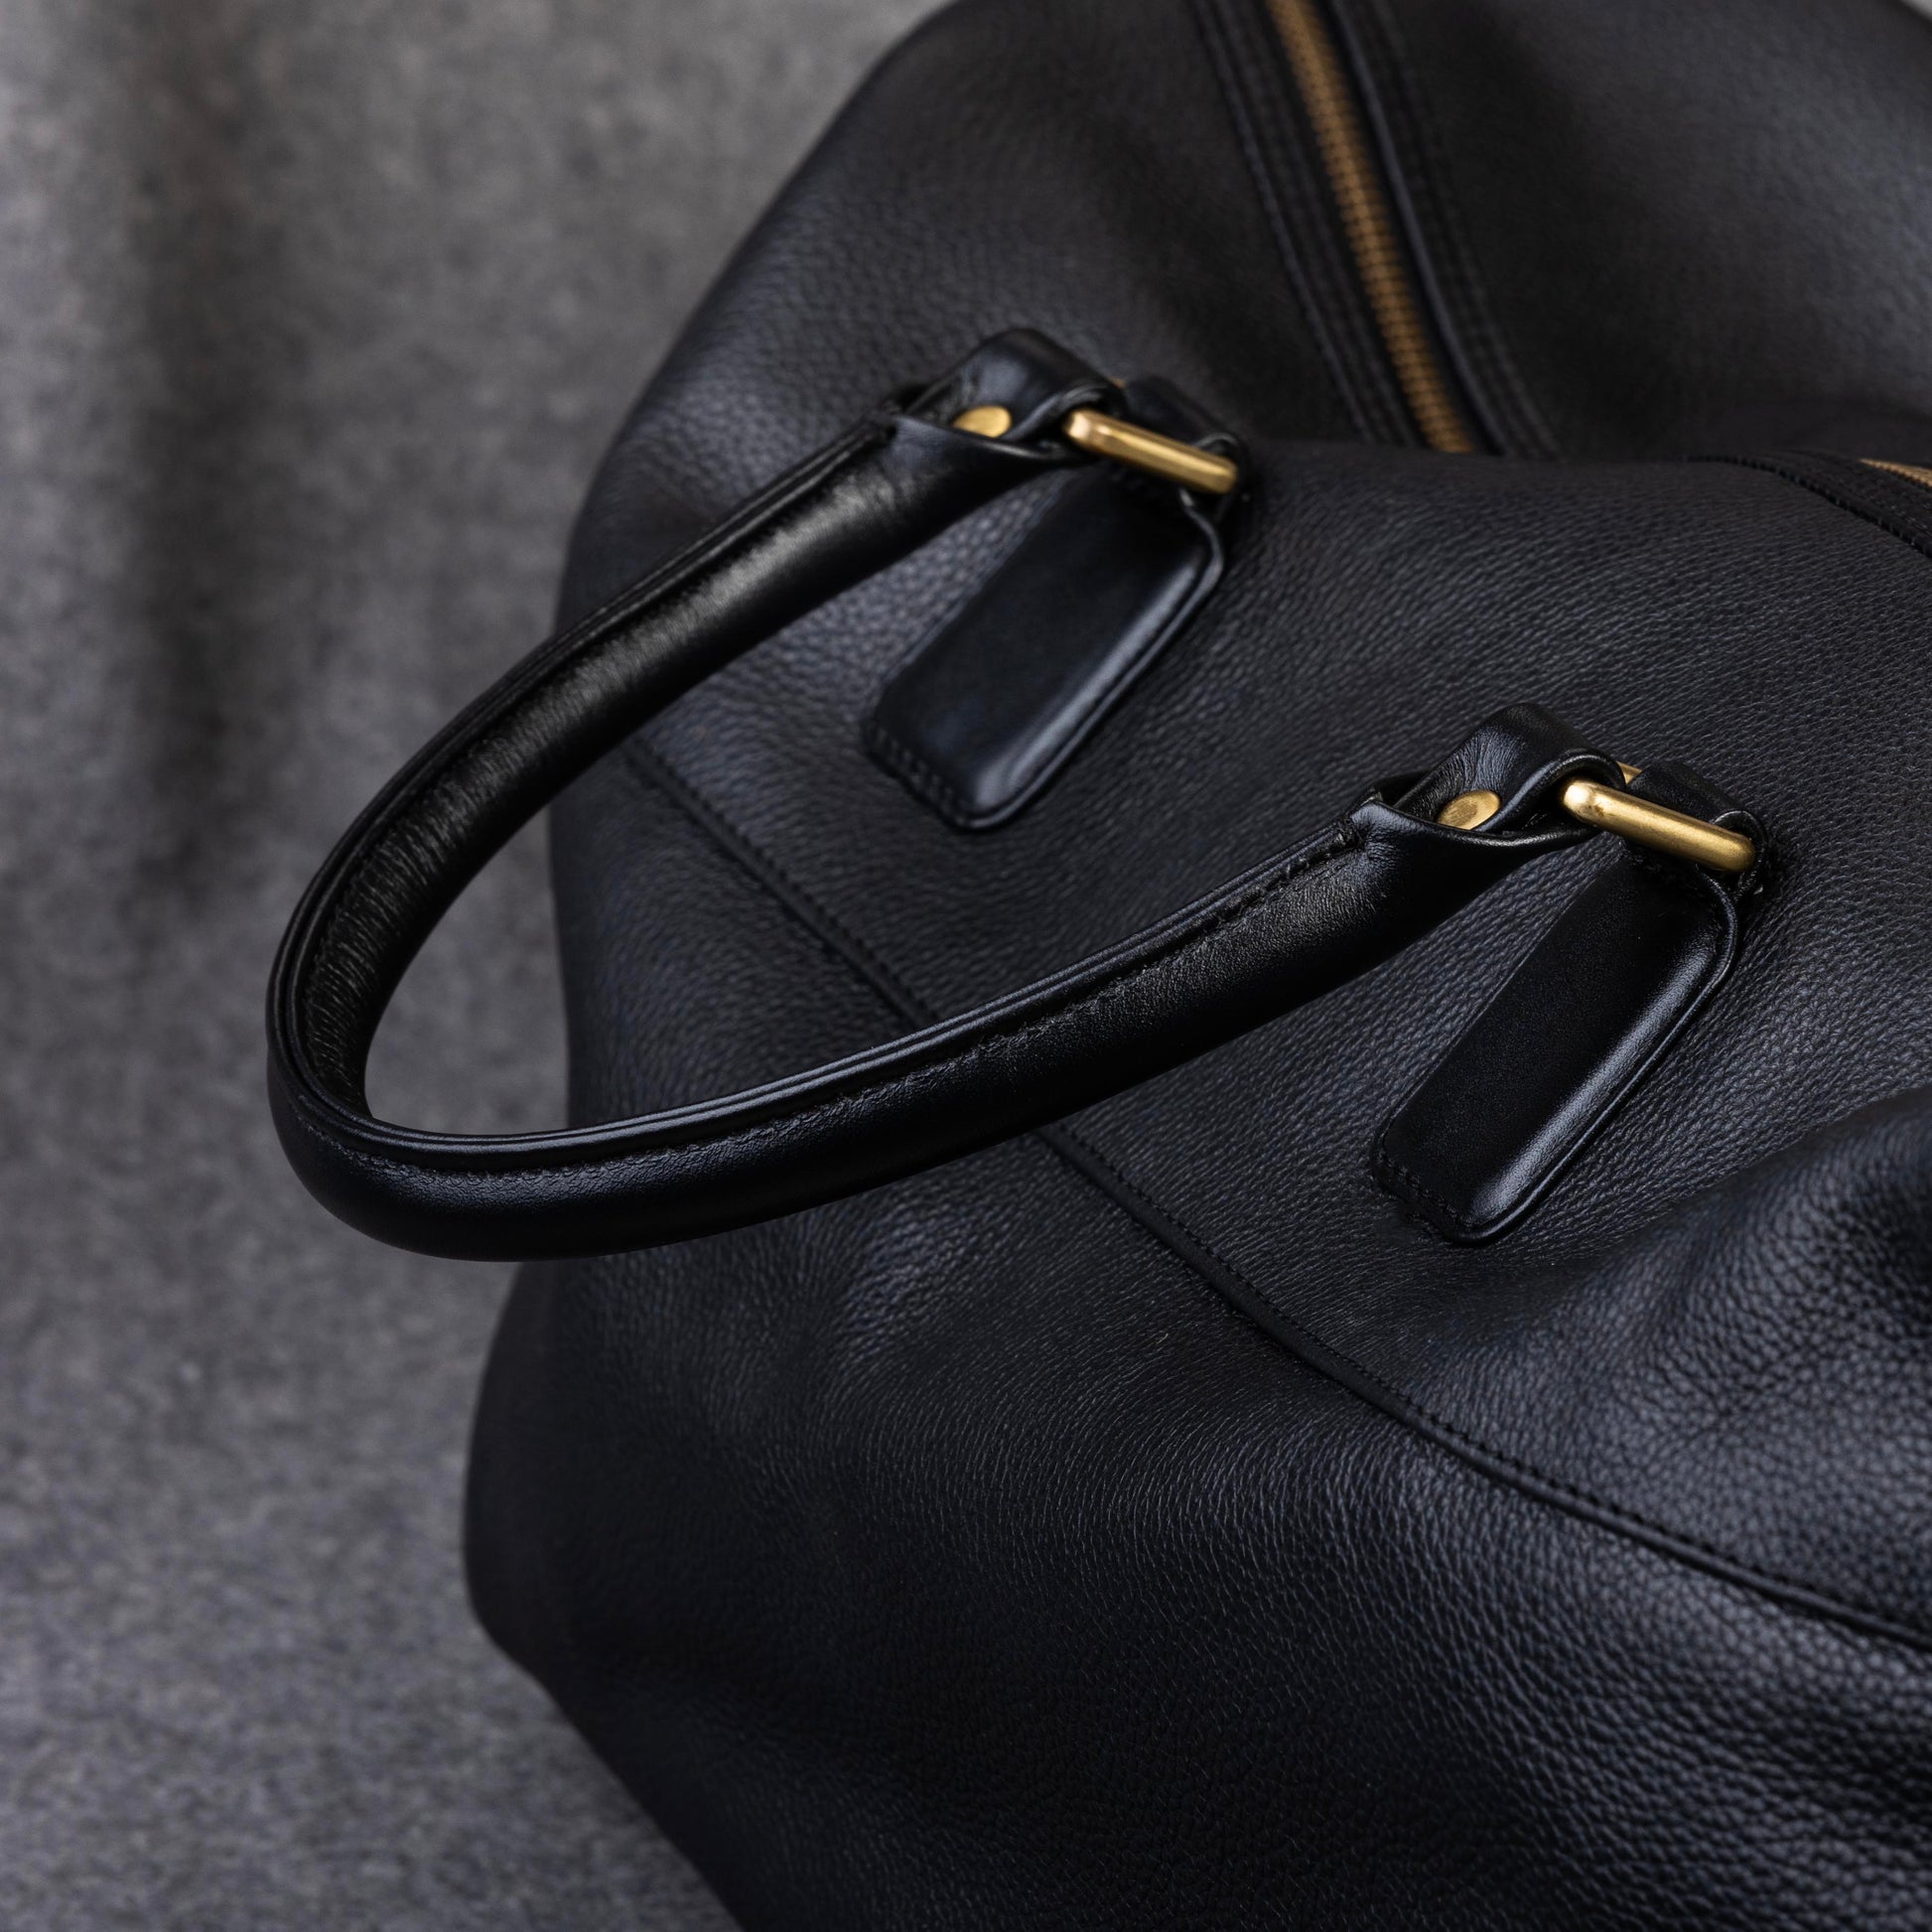 The Leather Duffle Bag has Tubular Handles for hand carry